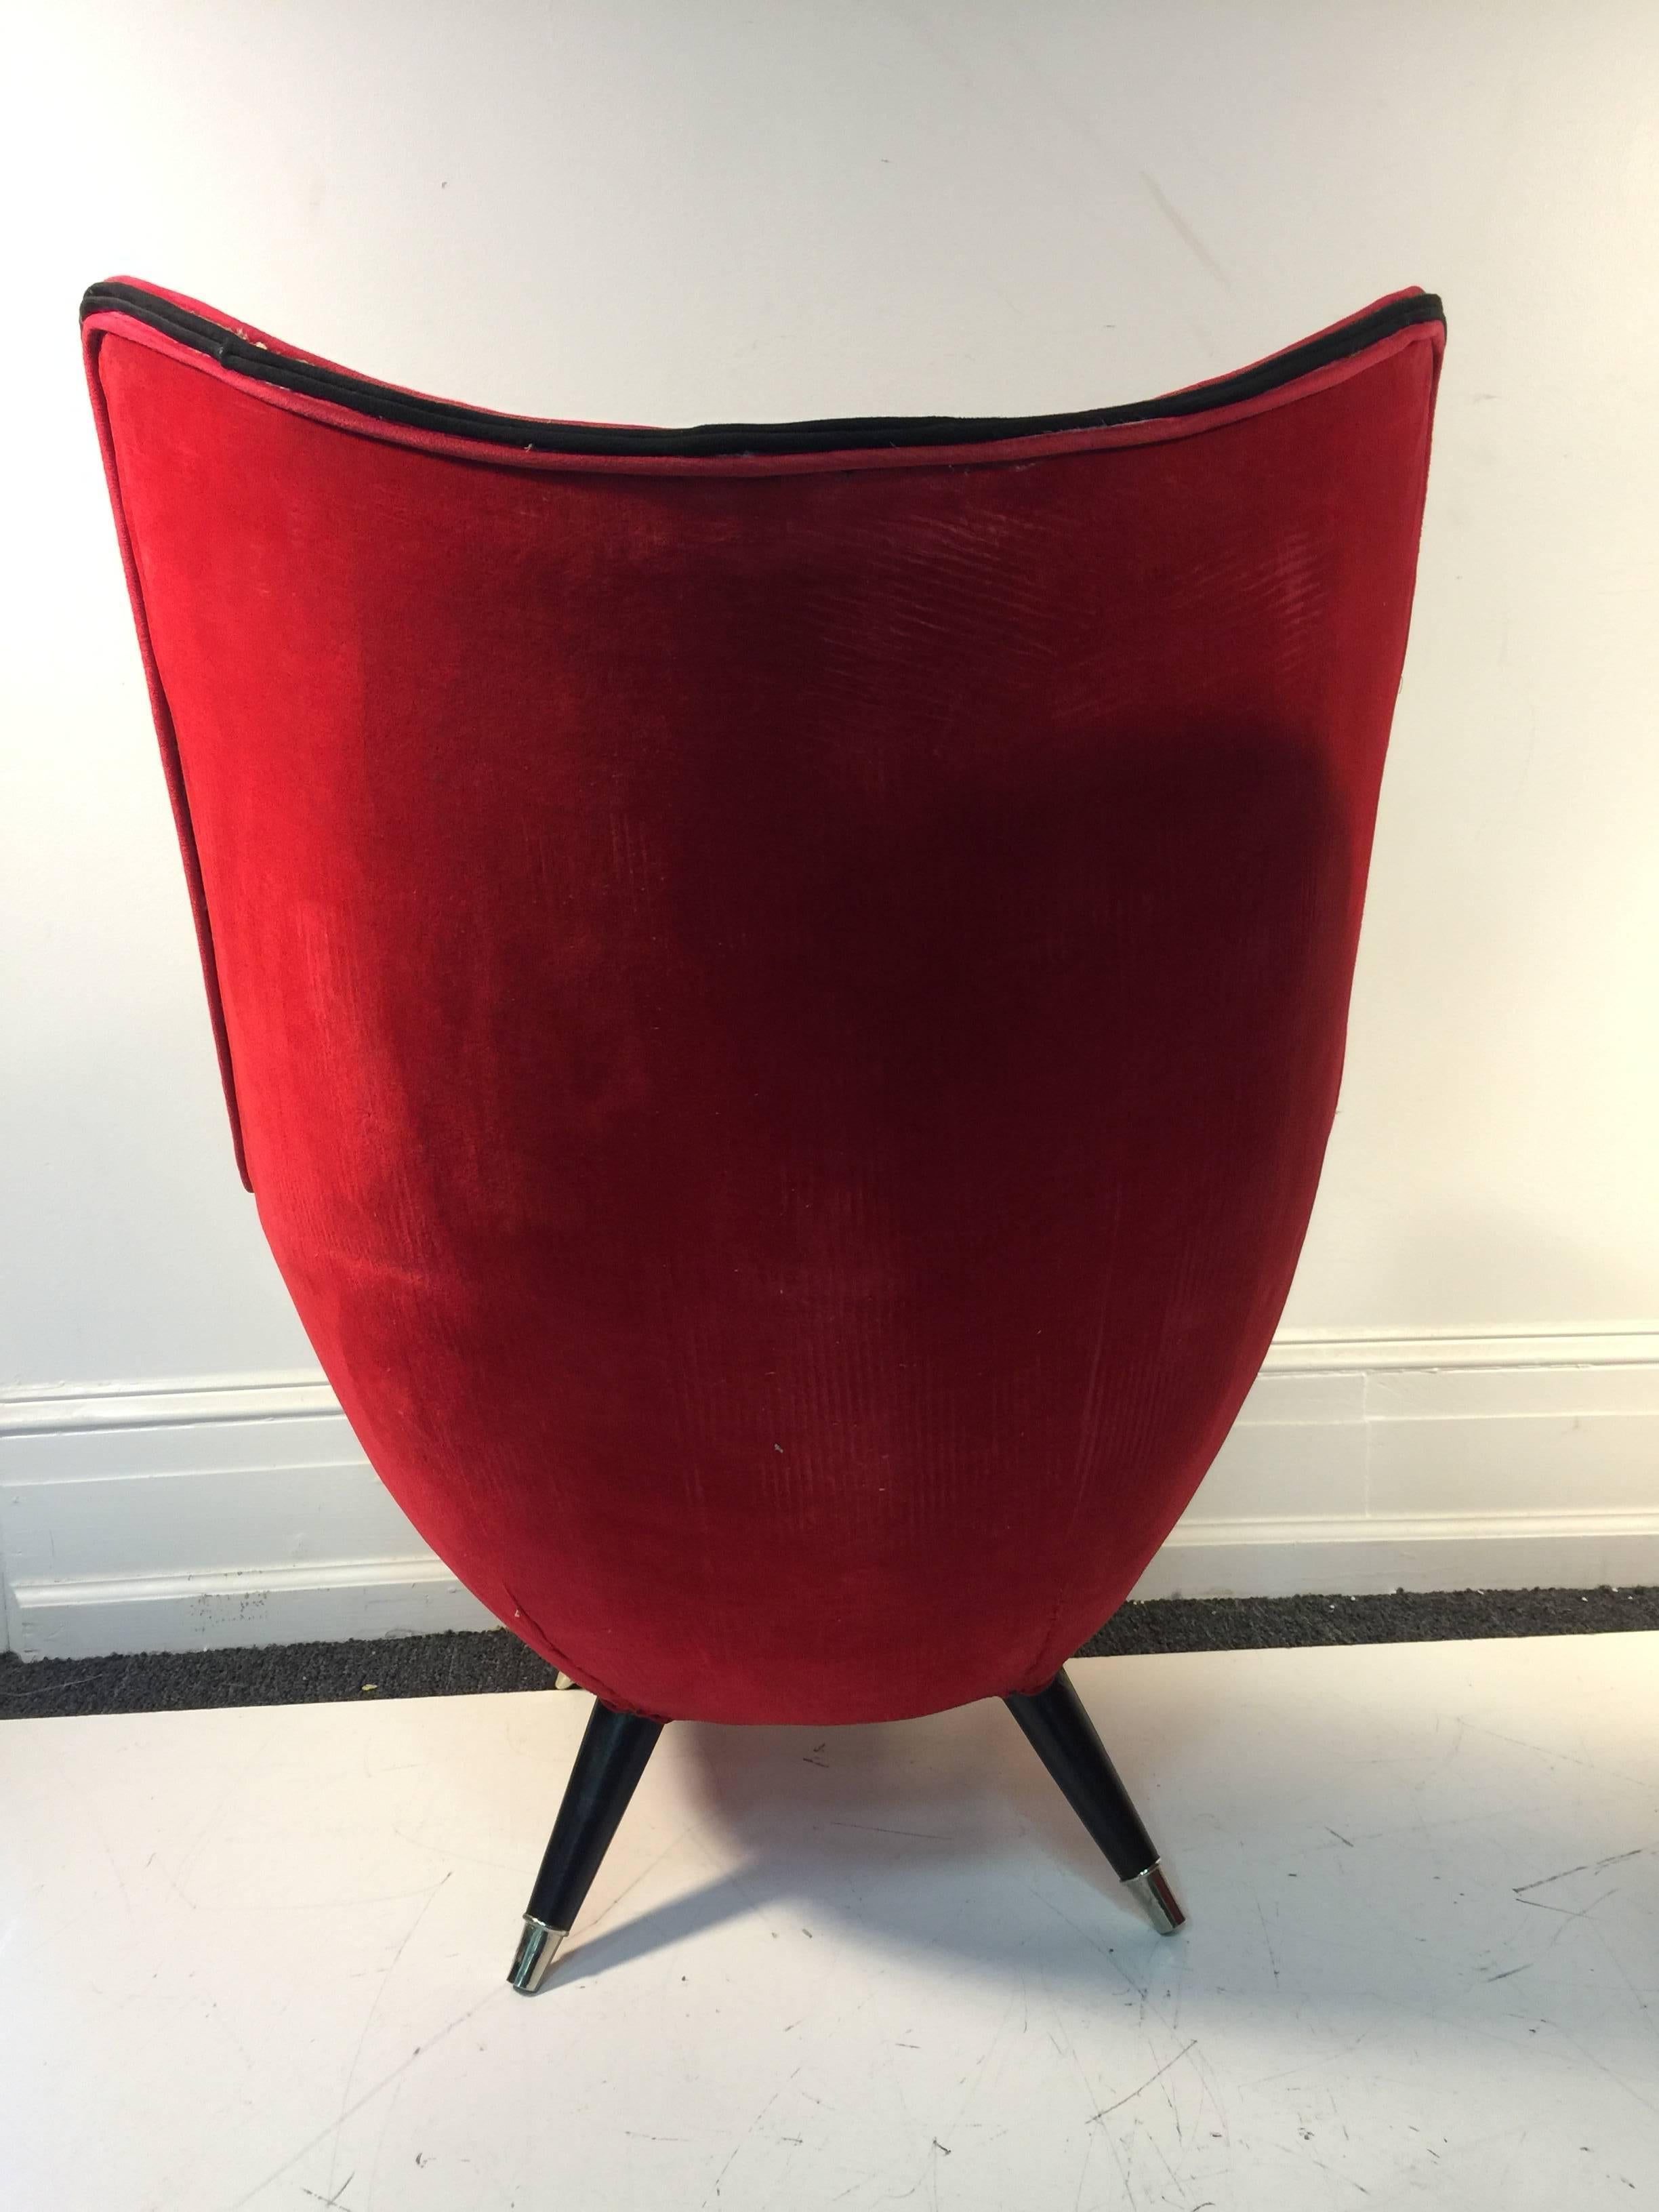  Exceptional Pair of Modernist Red/Black Lounge Chairs Atrributed to Jean Royere For Sale 2